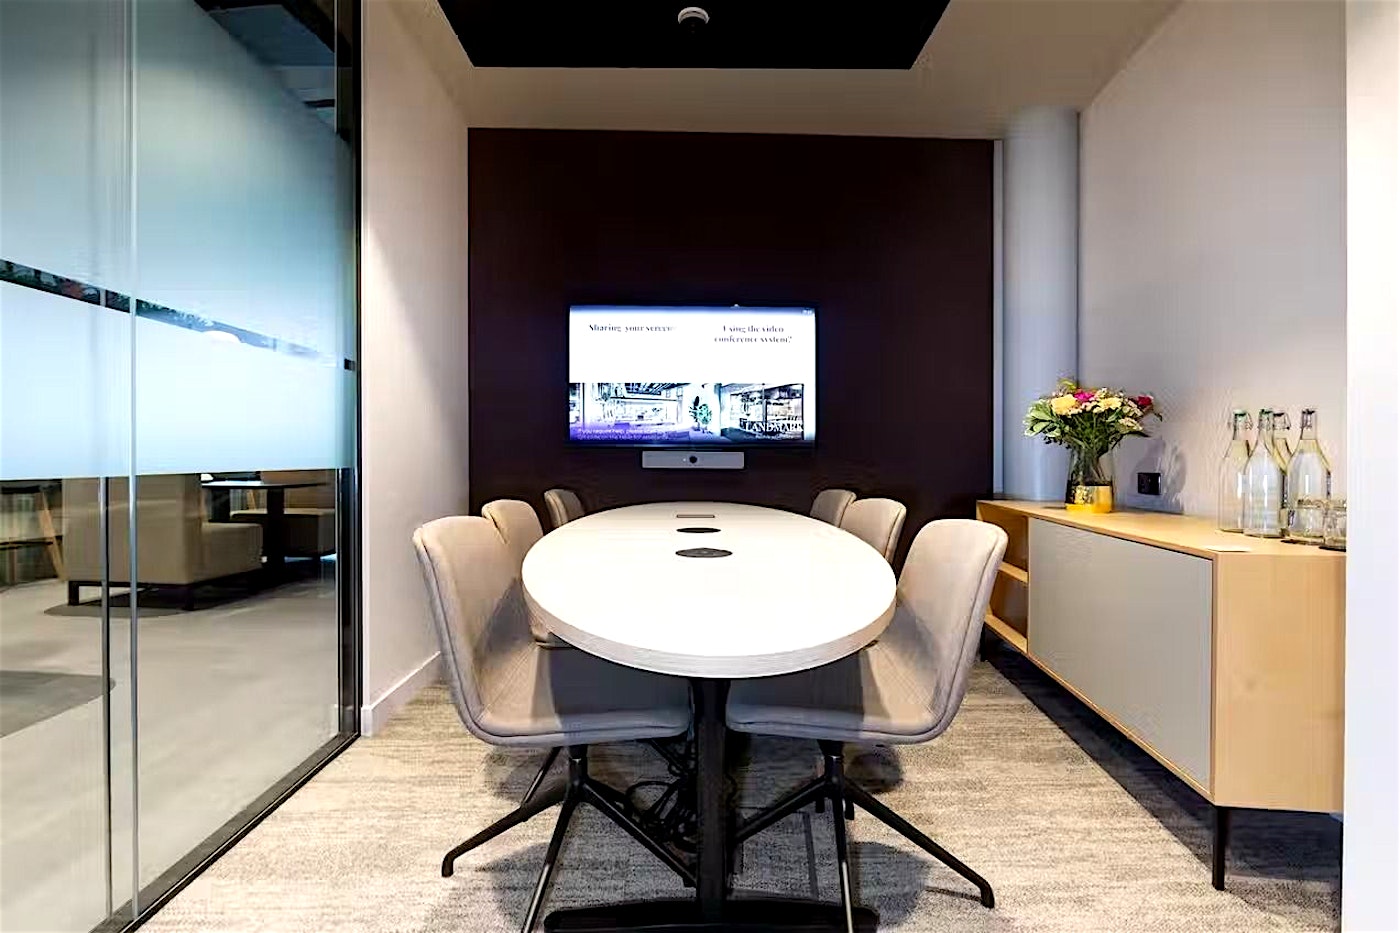 A mid-sized meeting room in London with TV screen